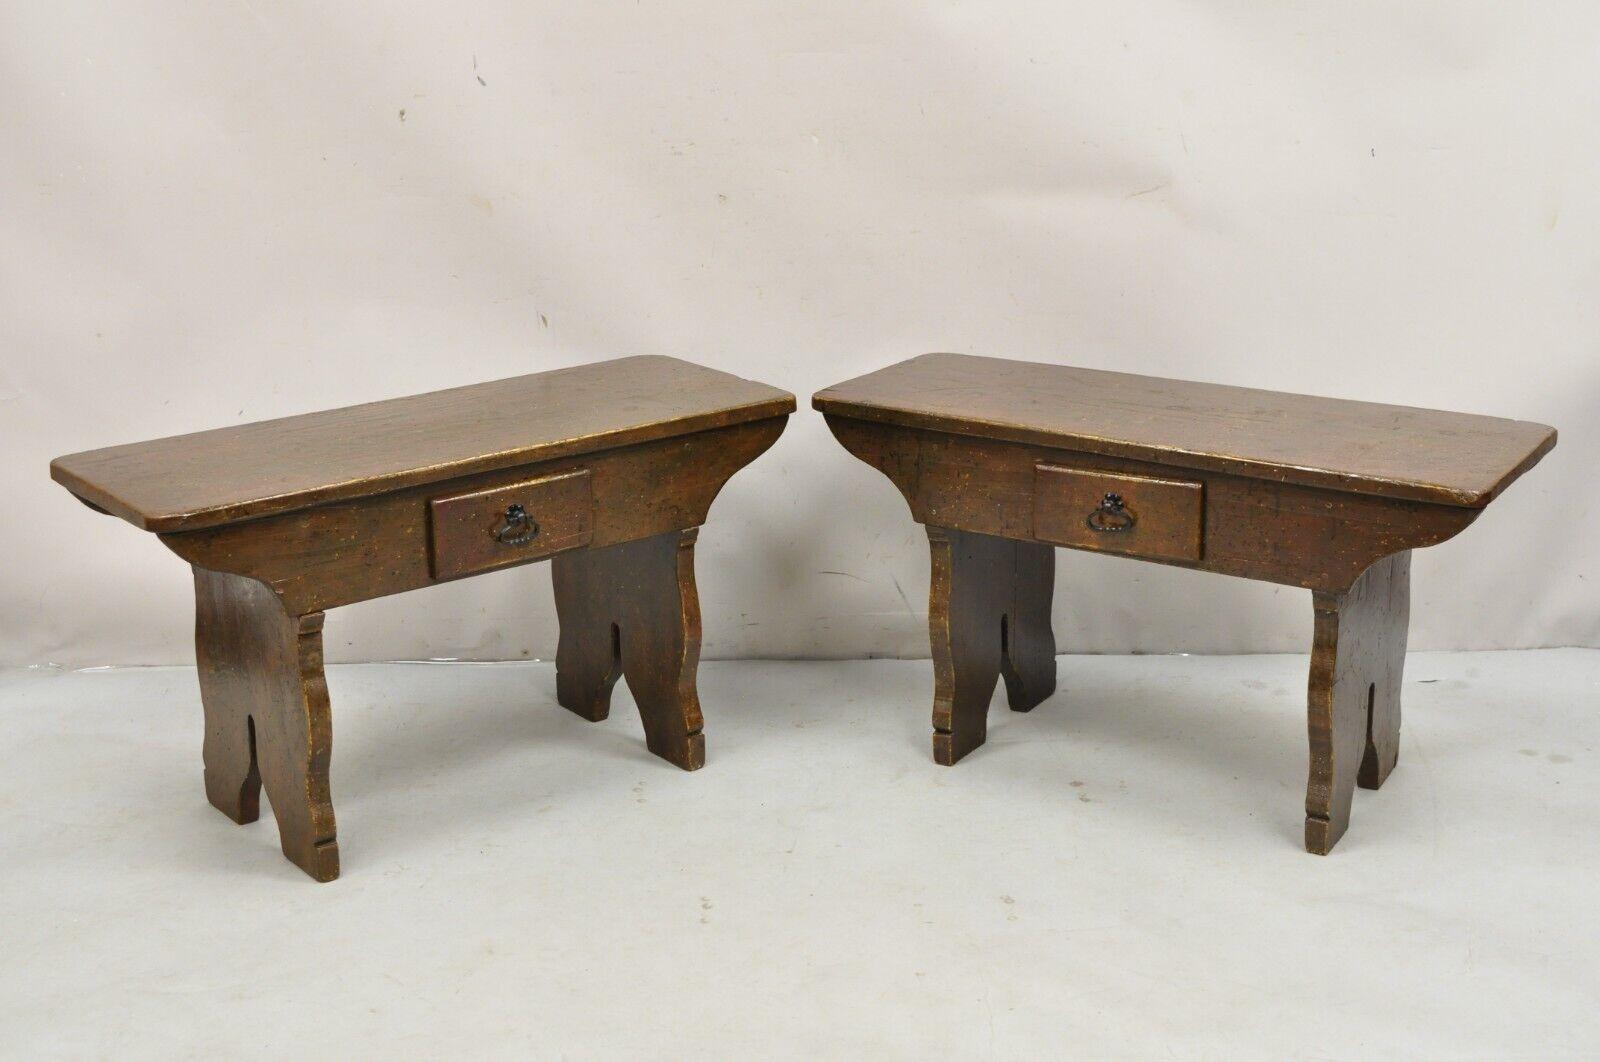 Antique French Country Farmhouse Pine Wood Low Side Table Benches w/ Drawer - Pair. Item features solid wood construction, distressed antiqued finish, single drawer with iron hardware, nicely carved legs. Great for use as low side tables or benches.